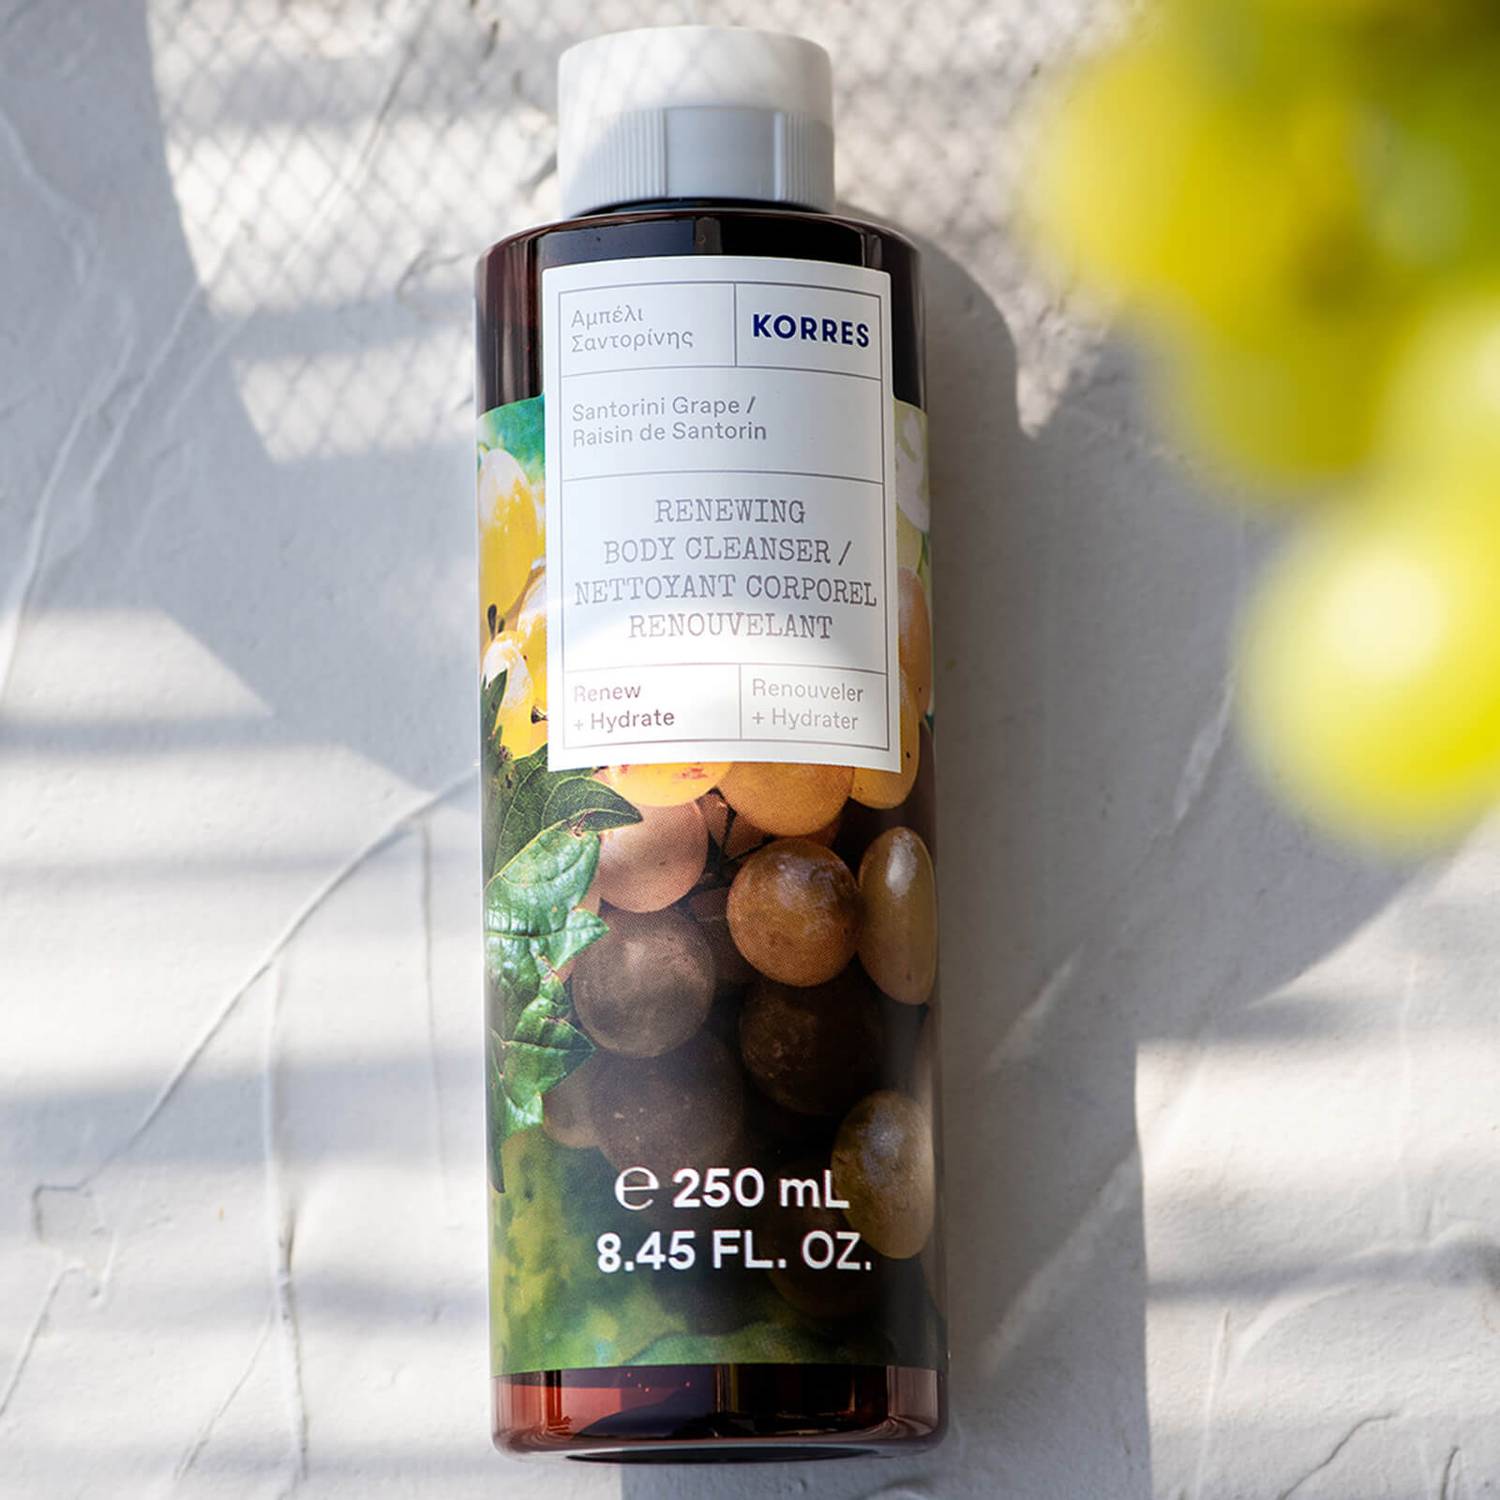 Korres Santorini Grape Renewing Body Cleanser with aloe extract, wheat proteins, and althea extract to help sustain skin's natural moisture levels, delivering a comforting cleanse. 